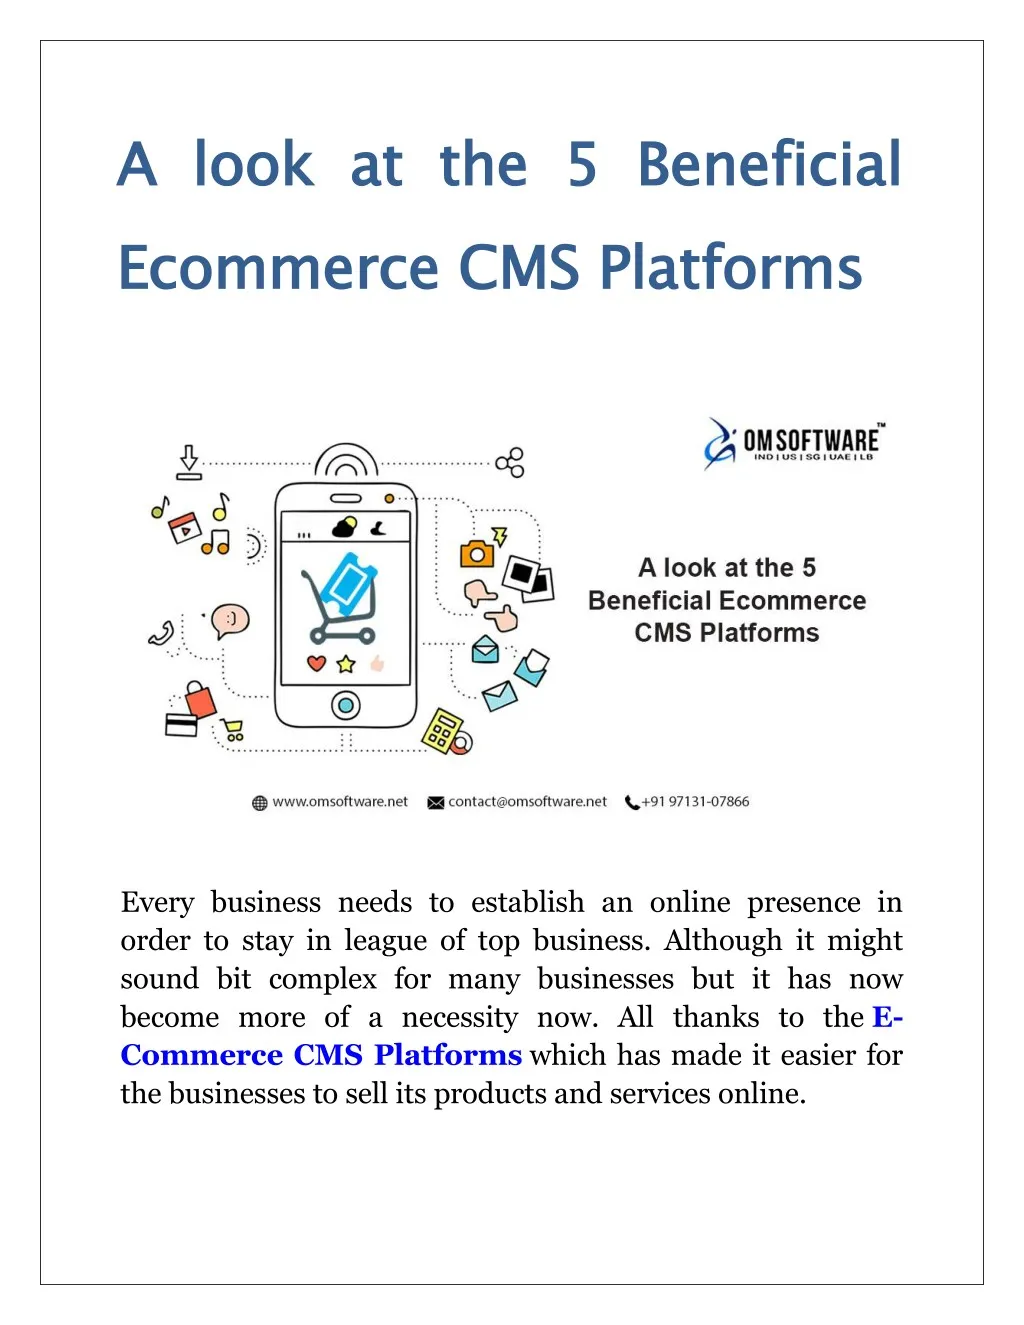 a look at the 5 beneficial ecommerce cms platforms